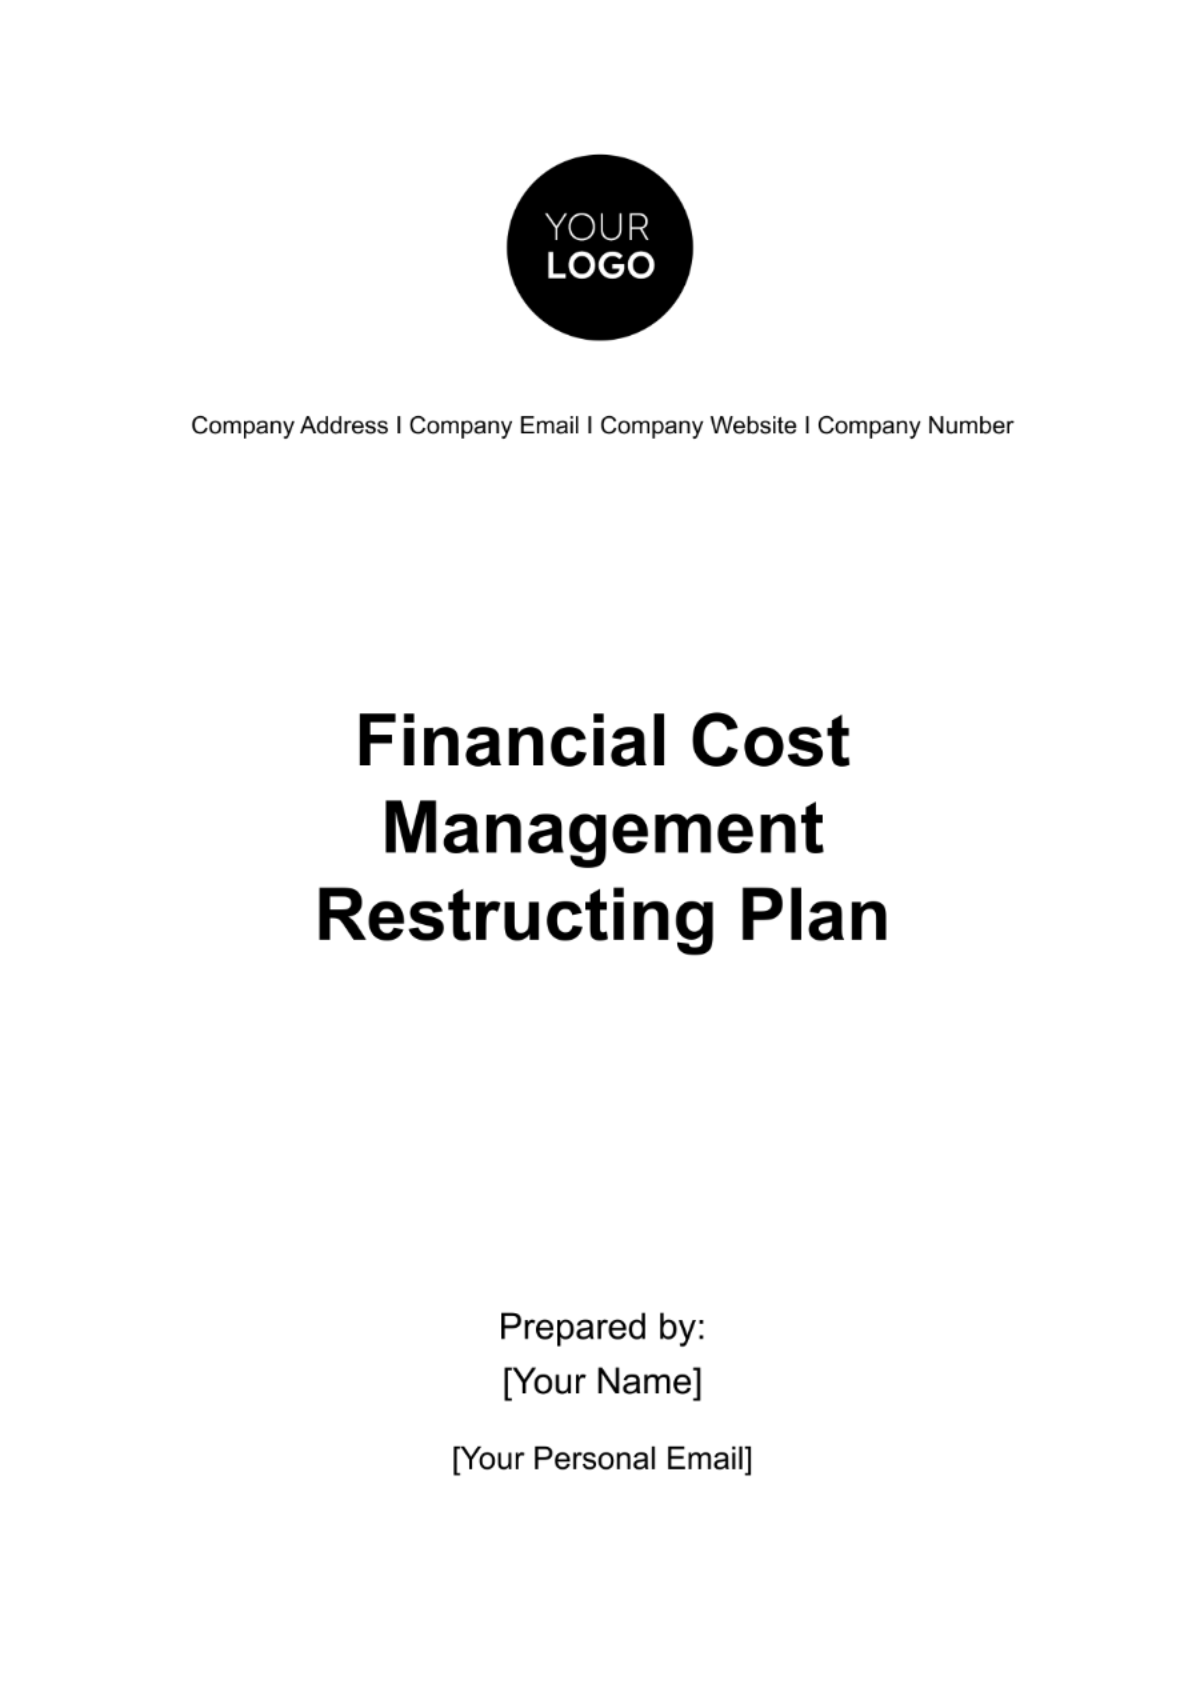 Financial Cost Management Restructuring Plan Template